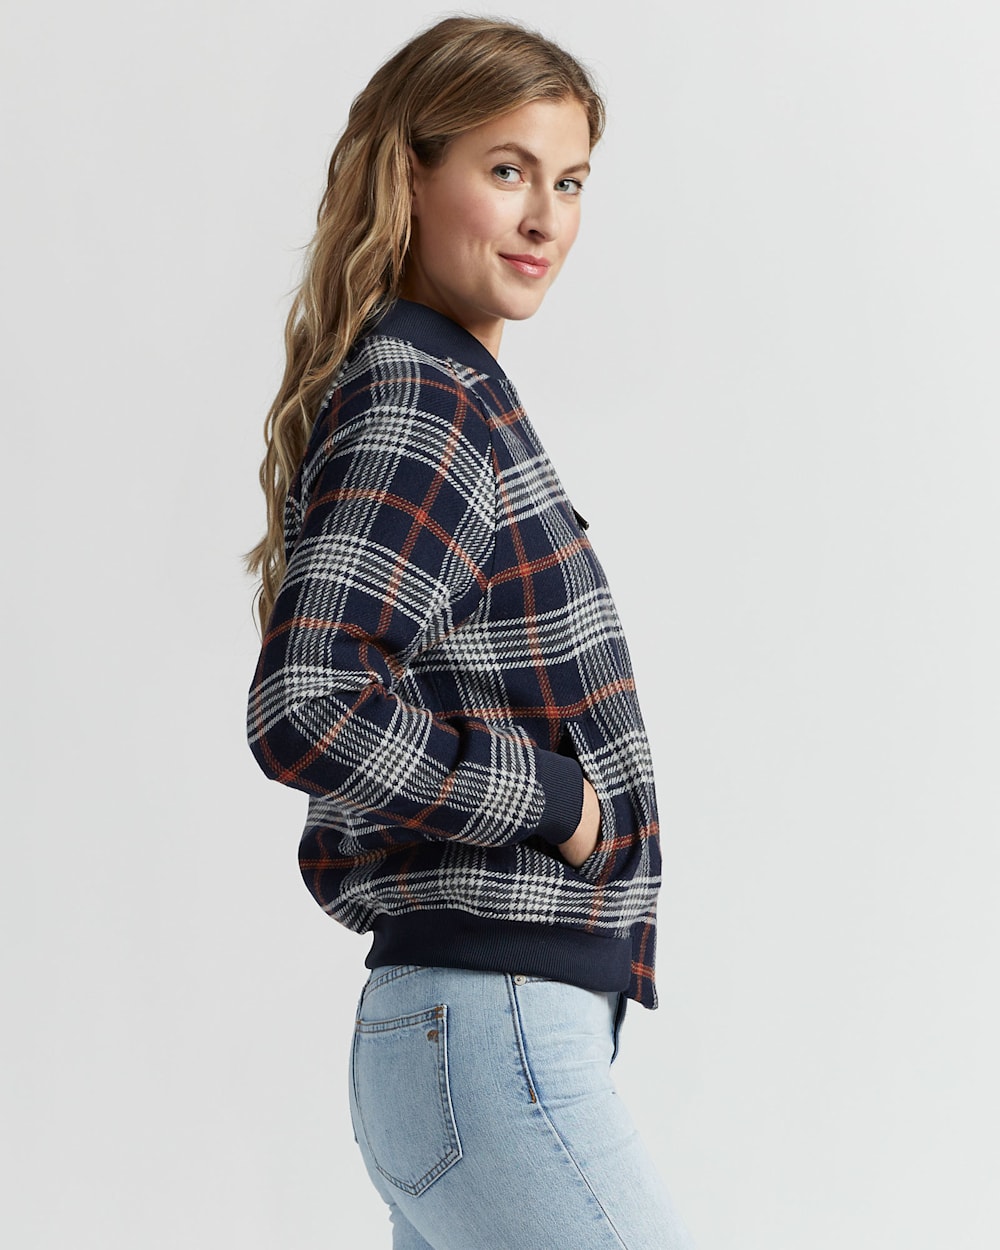 ALTERNATE VIEW OF WOMEN'S WOOL PLAID BOMBER JACKET IN NAVY/RED PLAID image number 2